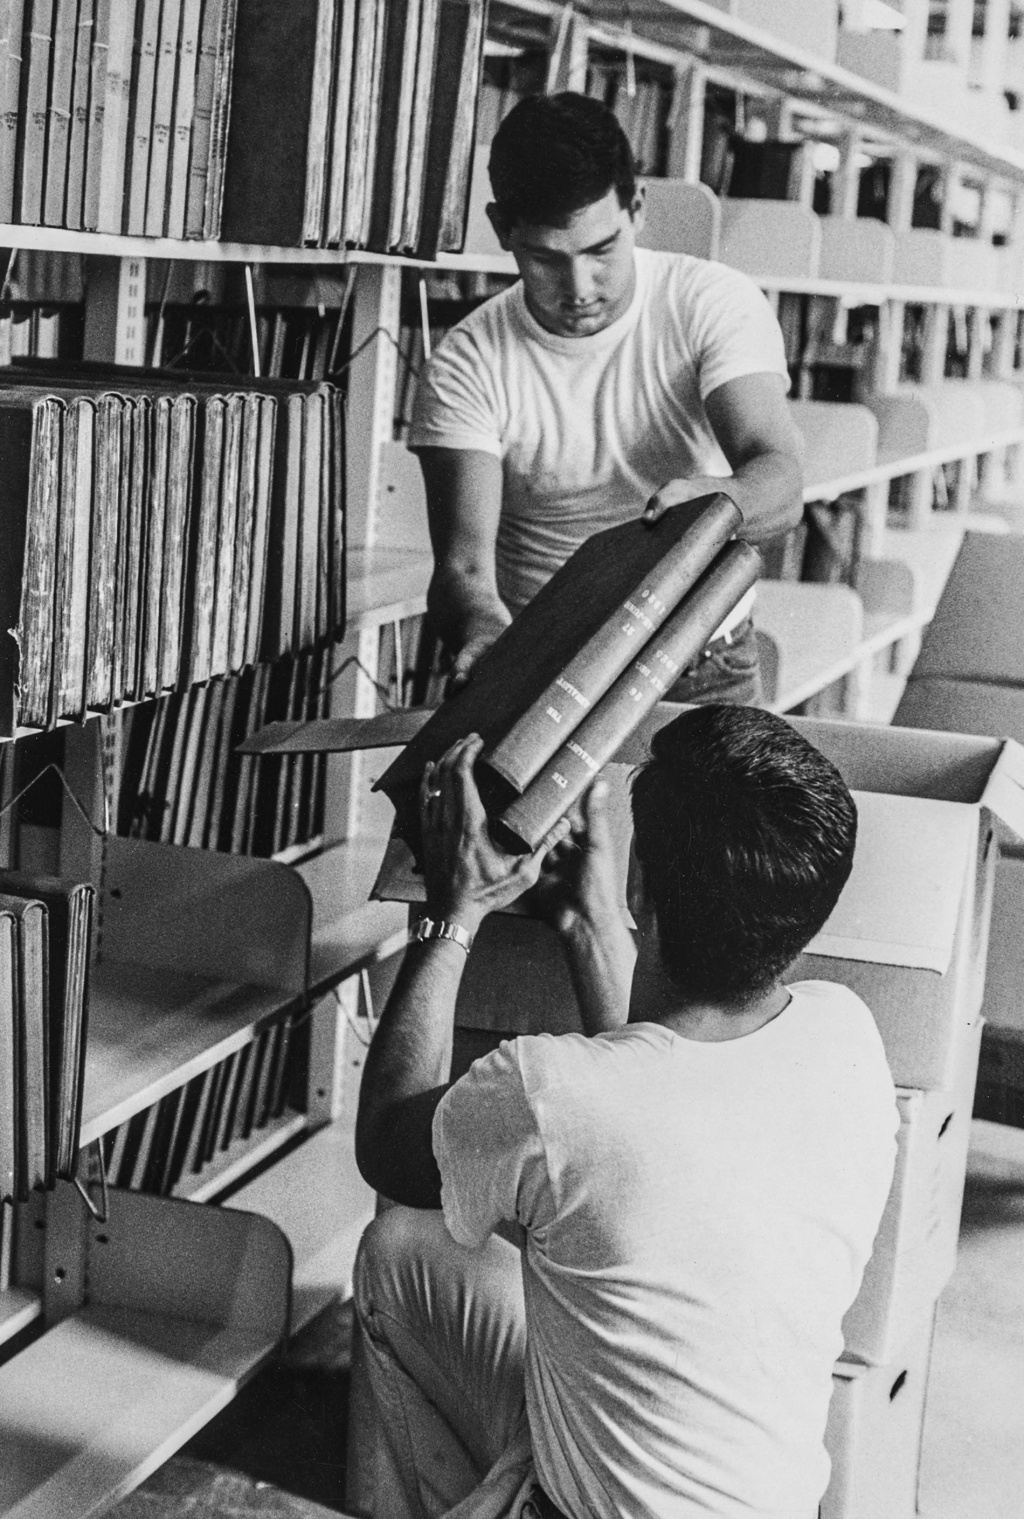 Image of workers unloading books at the John D. Rockefeller Jr. Library in 1964